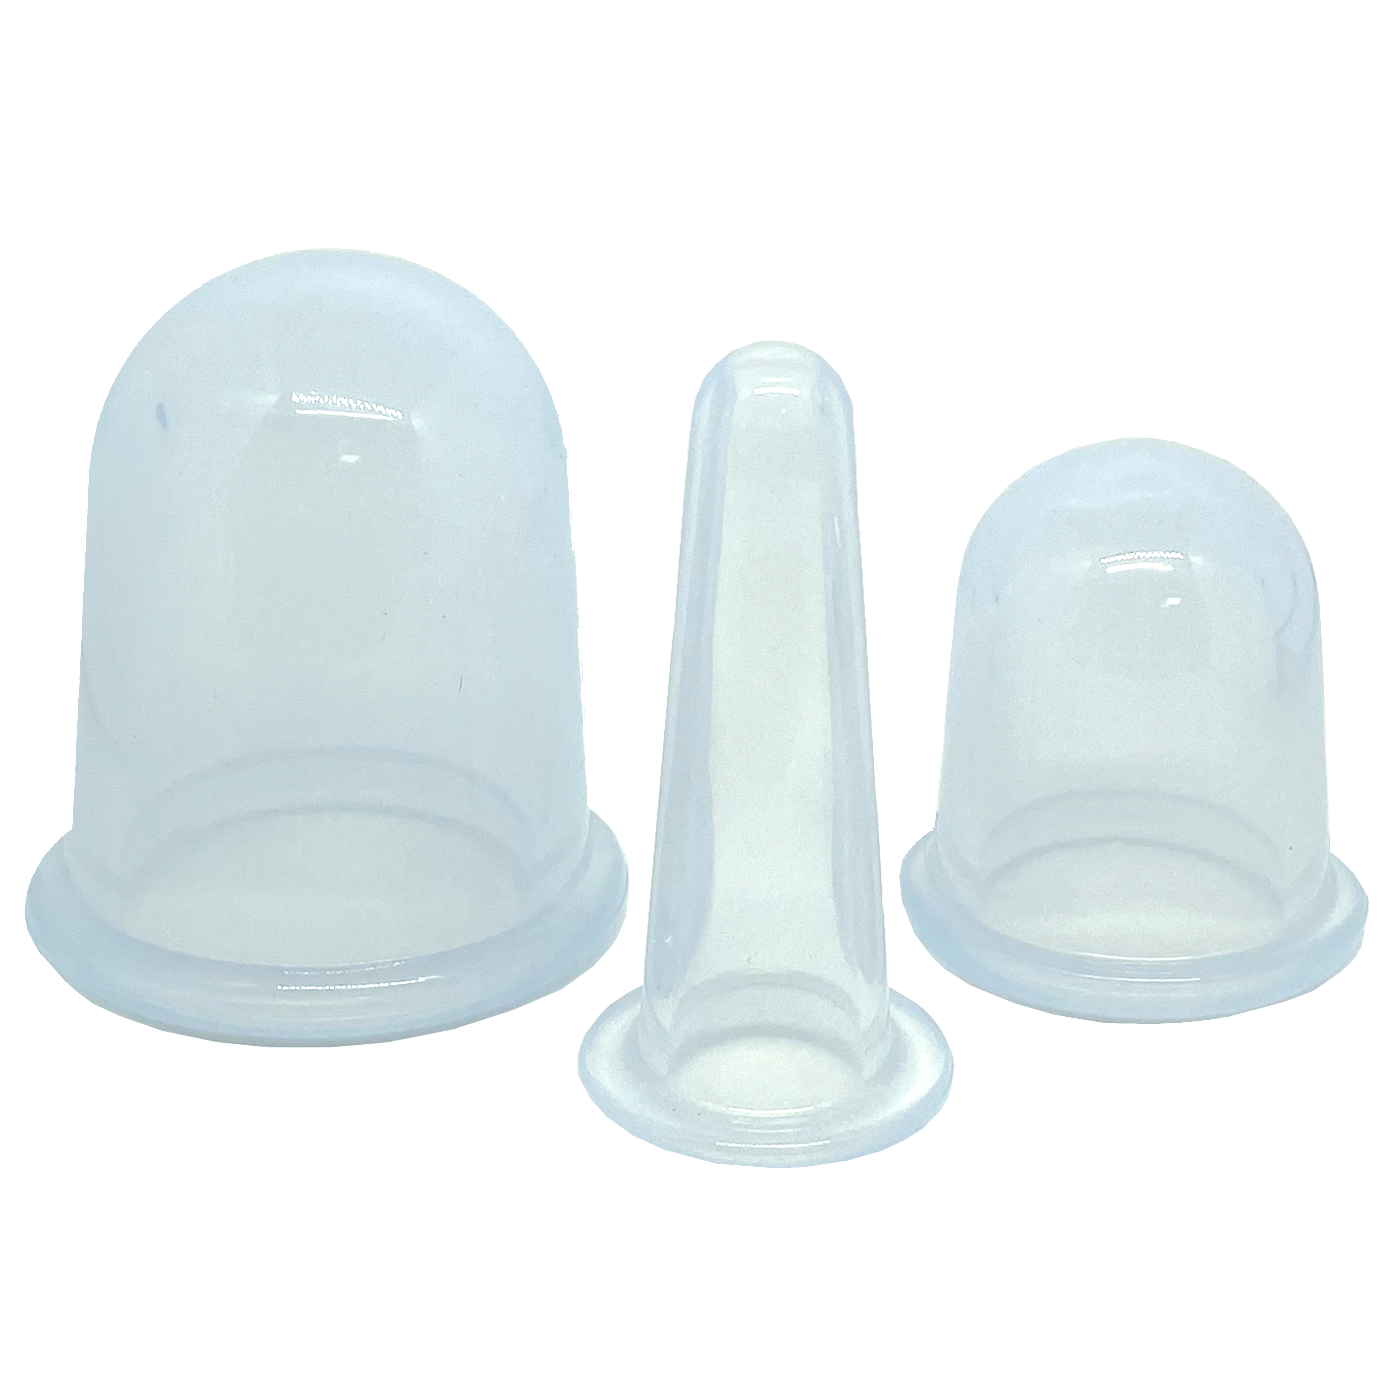 3-delige siliconen cuppingset